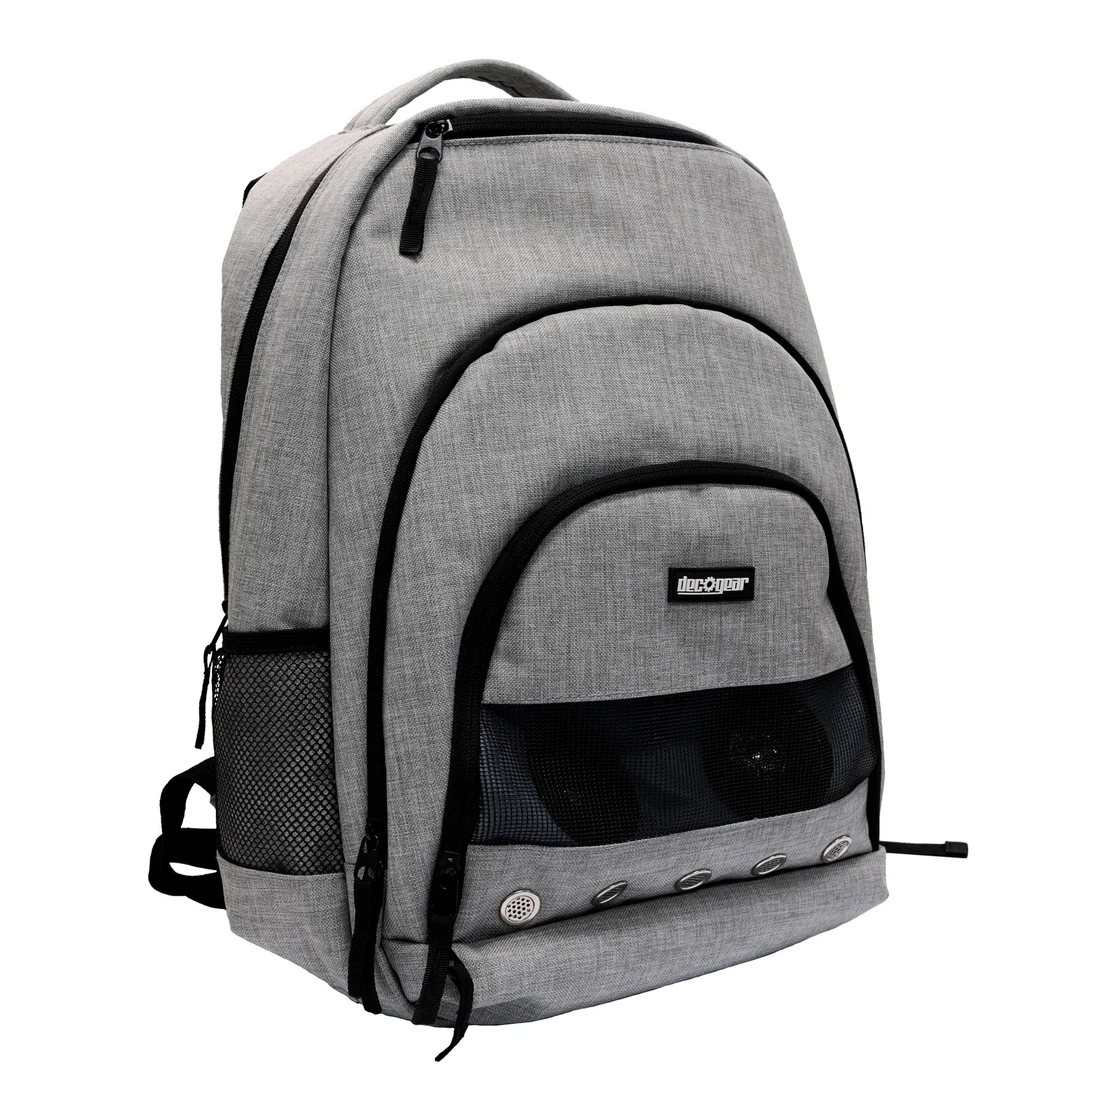 Deco Gear Bluetooth Speaker Backpack Front View